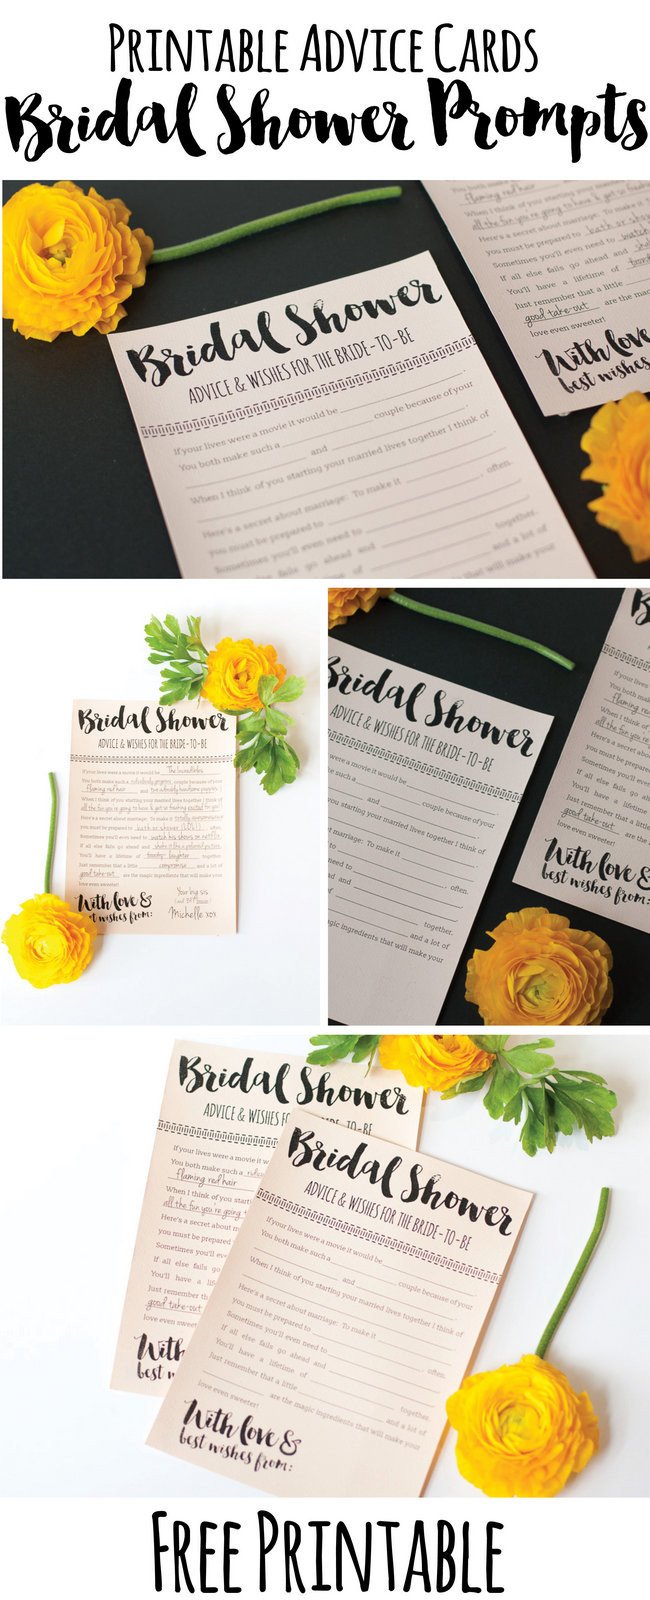 Fun Printable Bridal Shower Advice Cards FREE Download